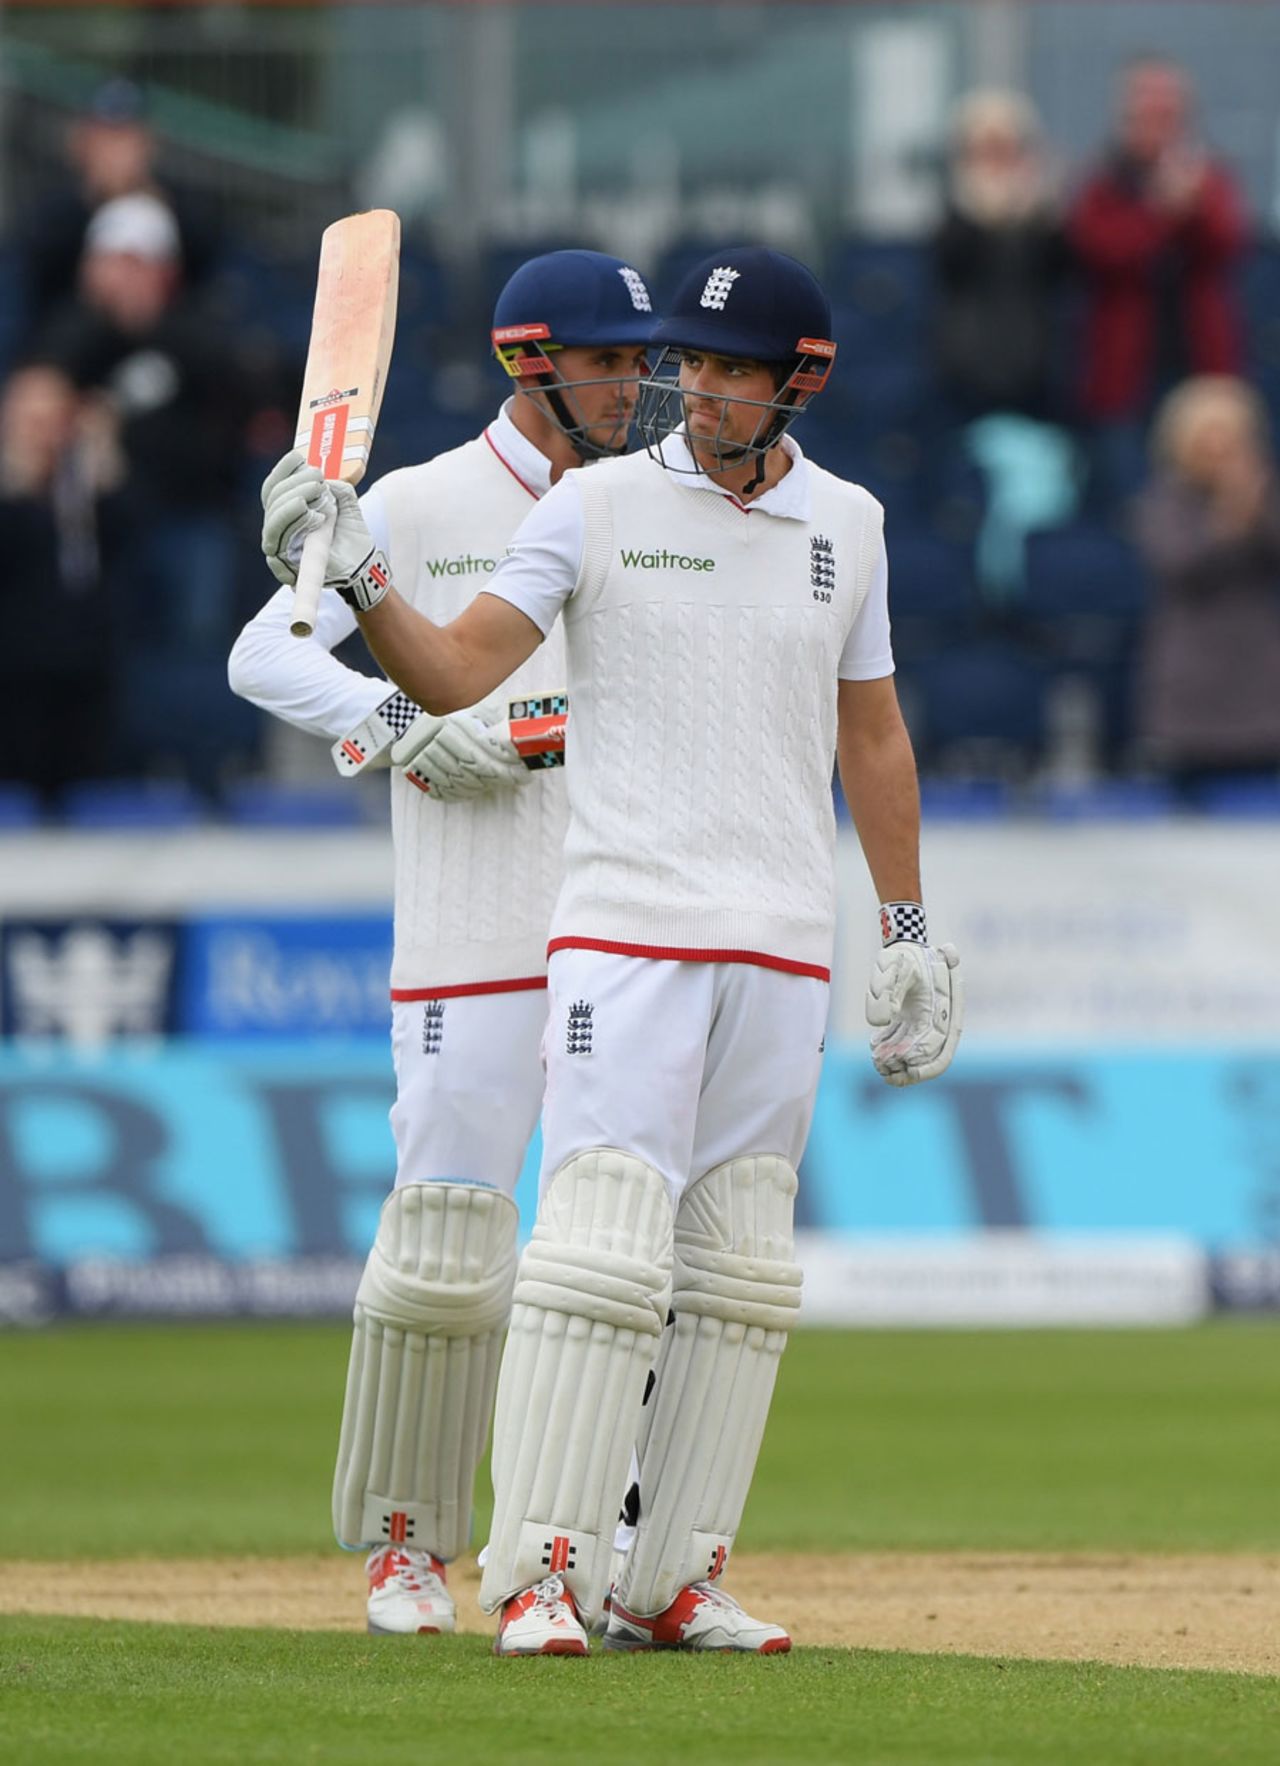 Alastair Cook reached 10,000 Test runs early in England's run-chase, England v Sri Lanka, 2nd Test, Chester-le-Street, 4th day, May 30, 2016